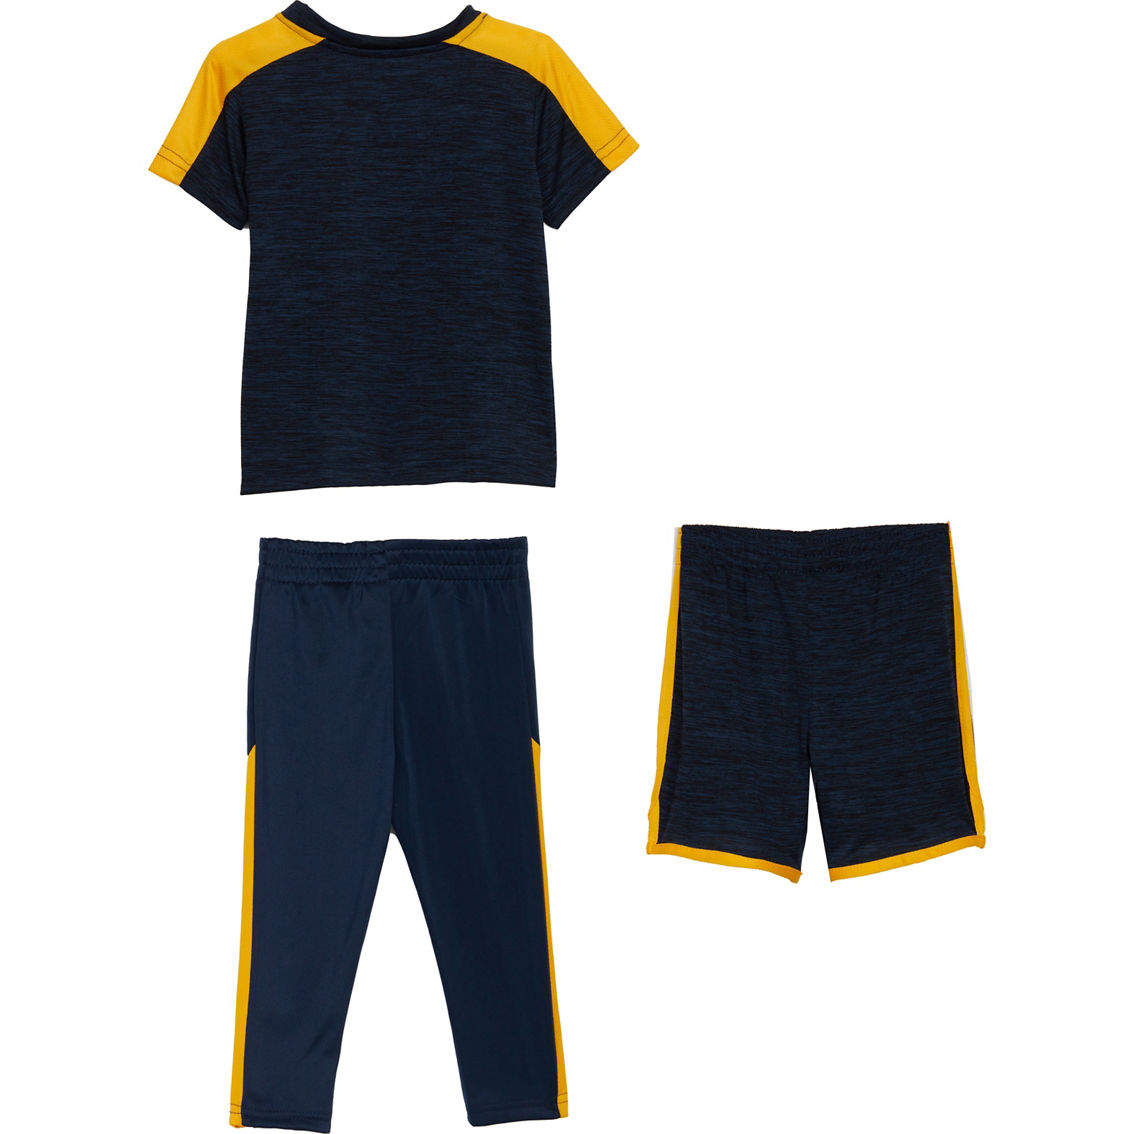 Hind Toddler Boys Tee, Shorts, and Pants 3 pc. Set - Image 2 of 2